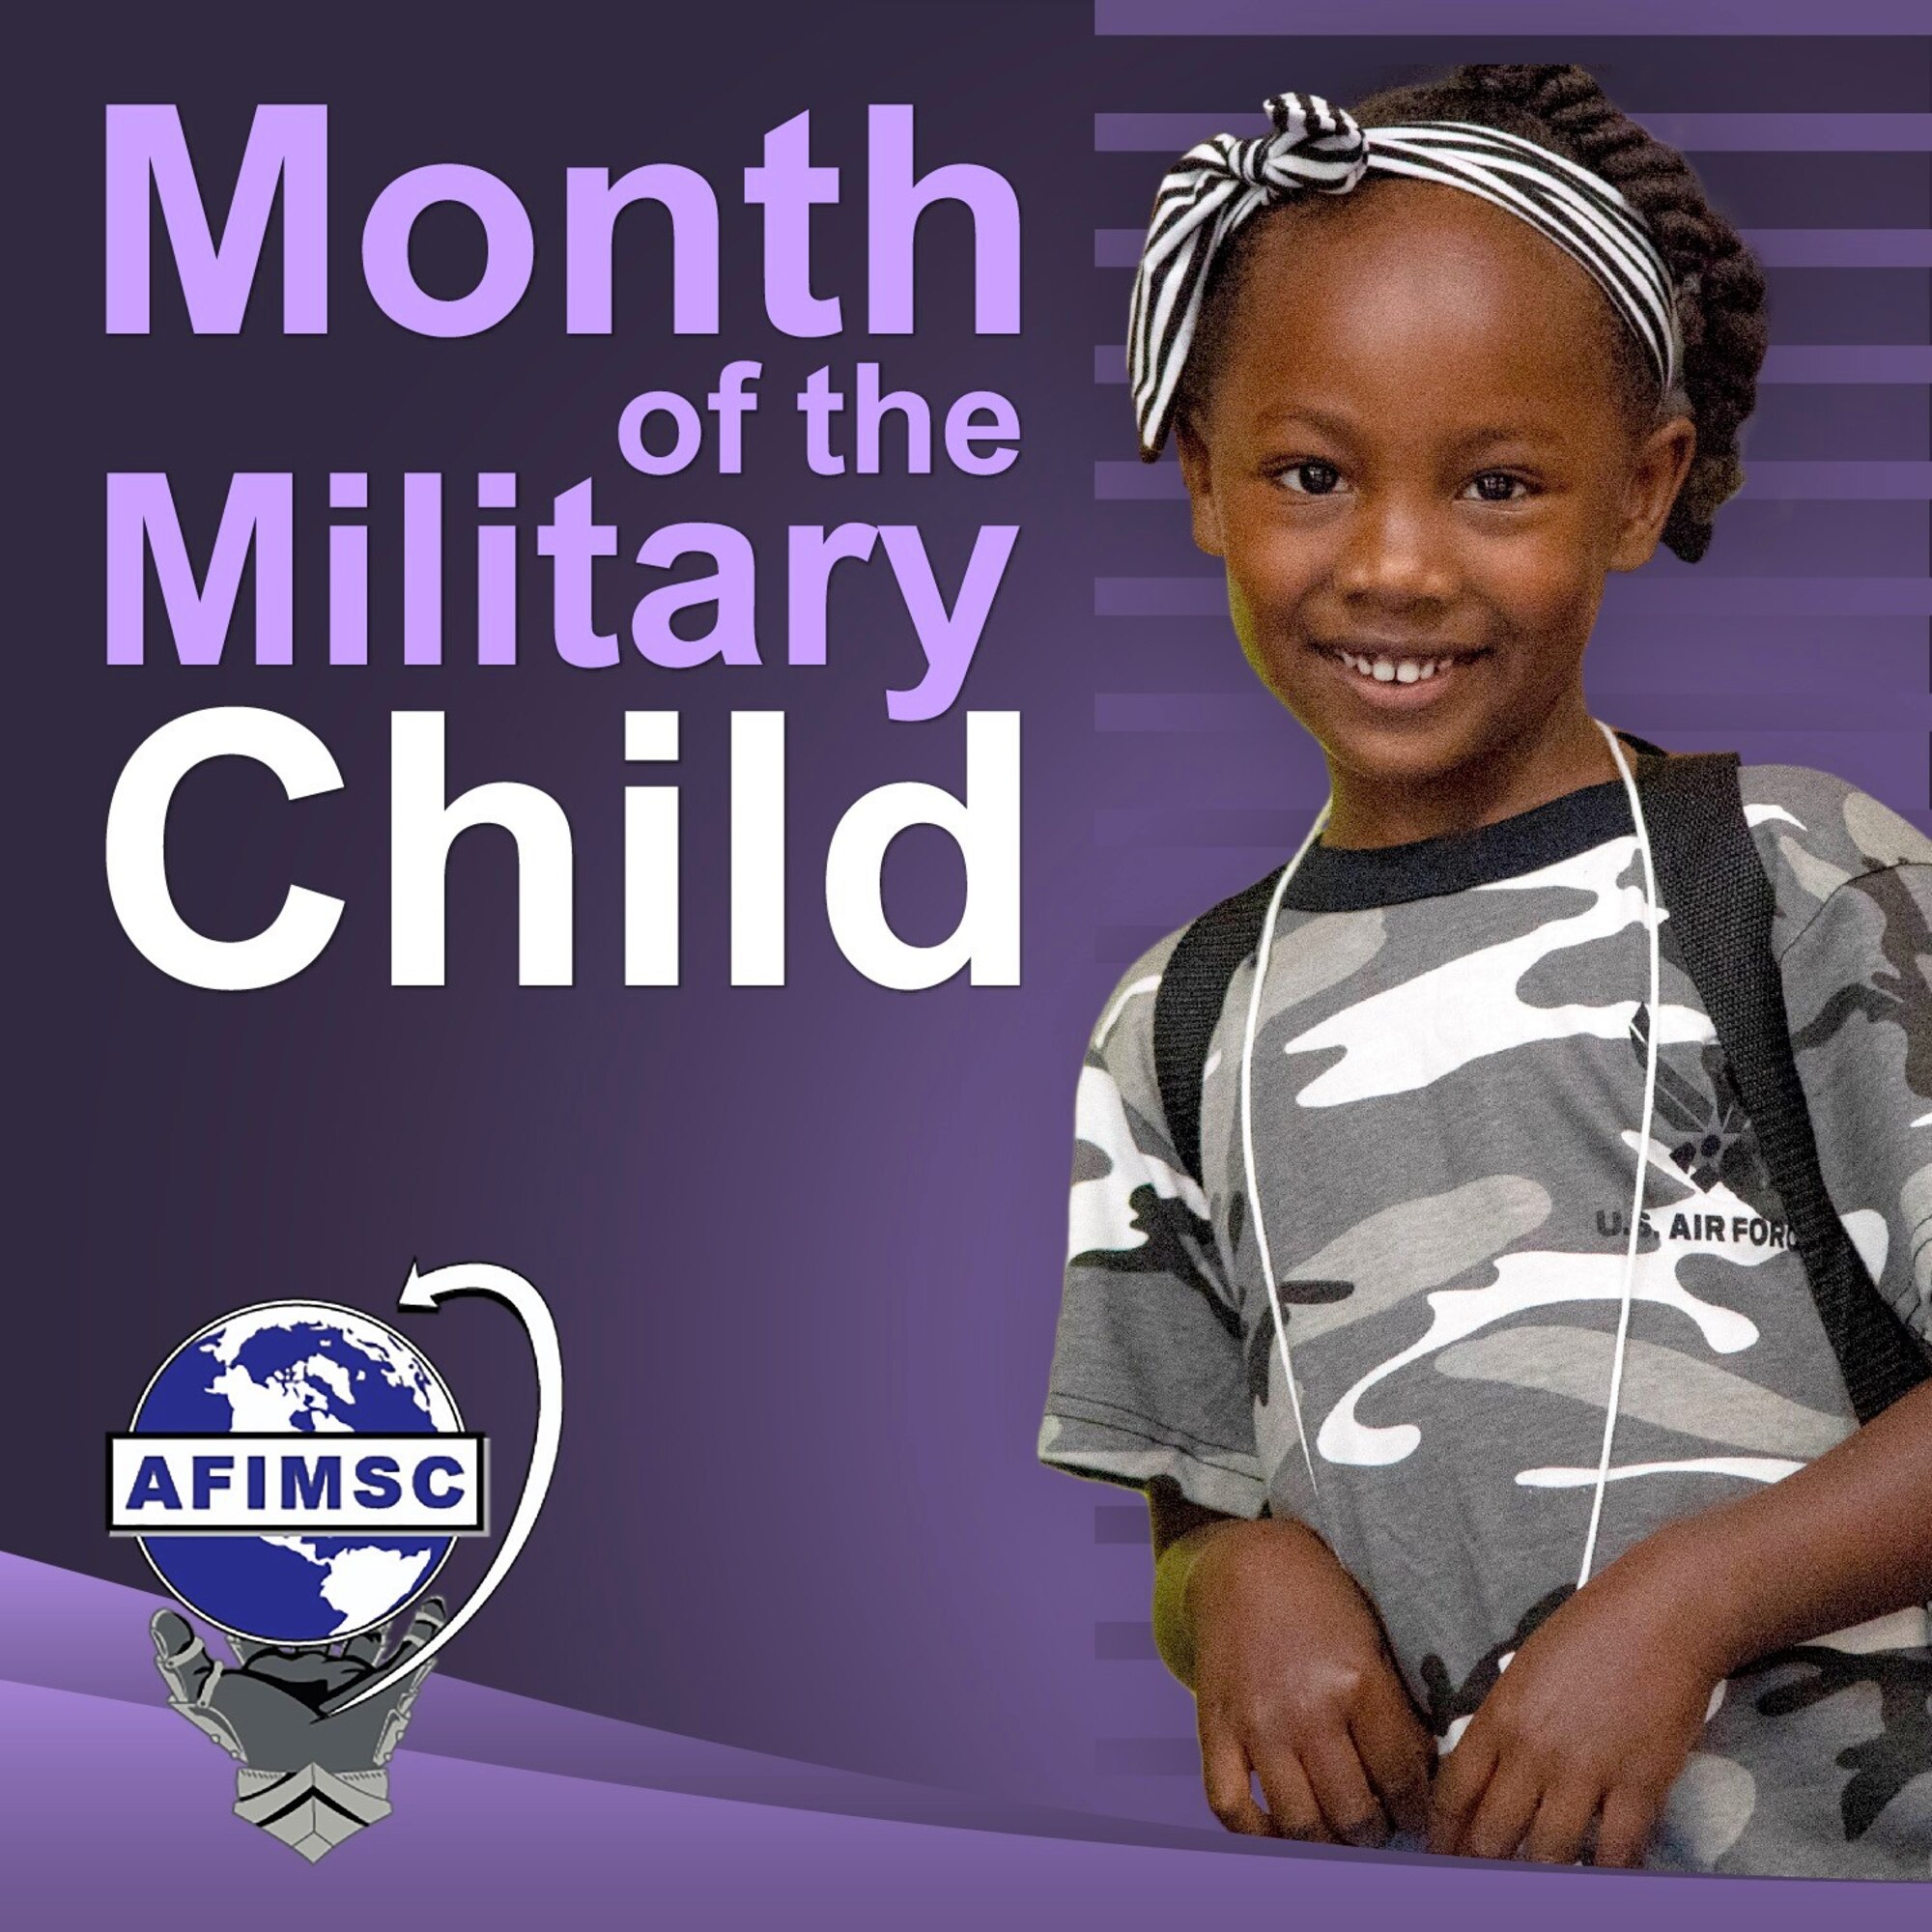 April is Month of the Military Child. Sponsored by the Department of Defense Military Community and Family Policy, the month-long observance acknowledges the important role military children play in their communities and honors their strength, bravery and resilience.